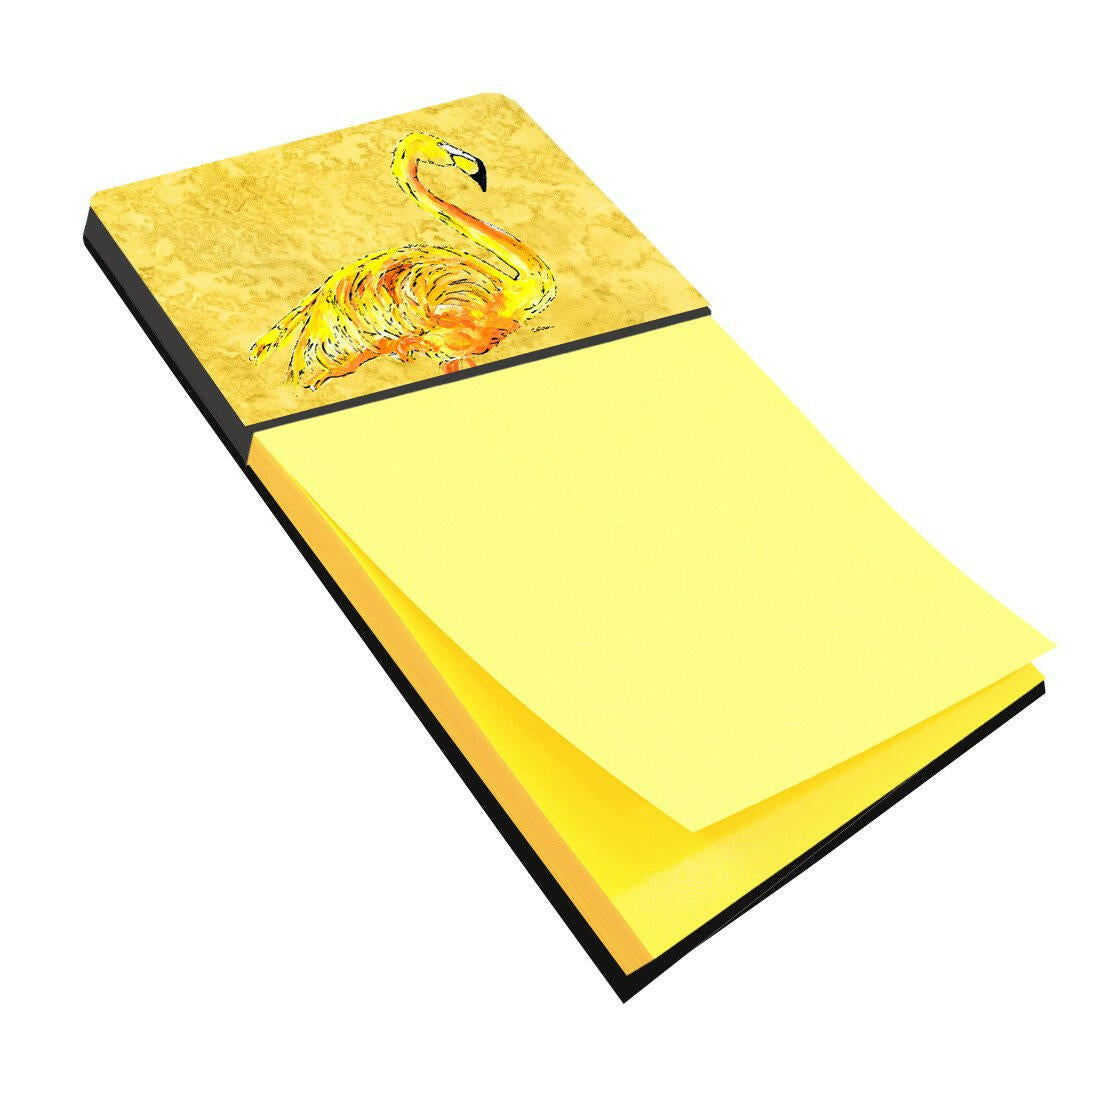 Flamingo on Yellow Refiillable Sticky Note Holder or Postit Note Dispenser 8872SN by Caroline's Treasures